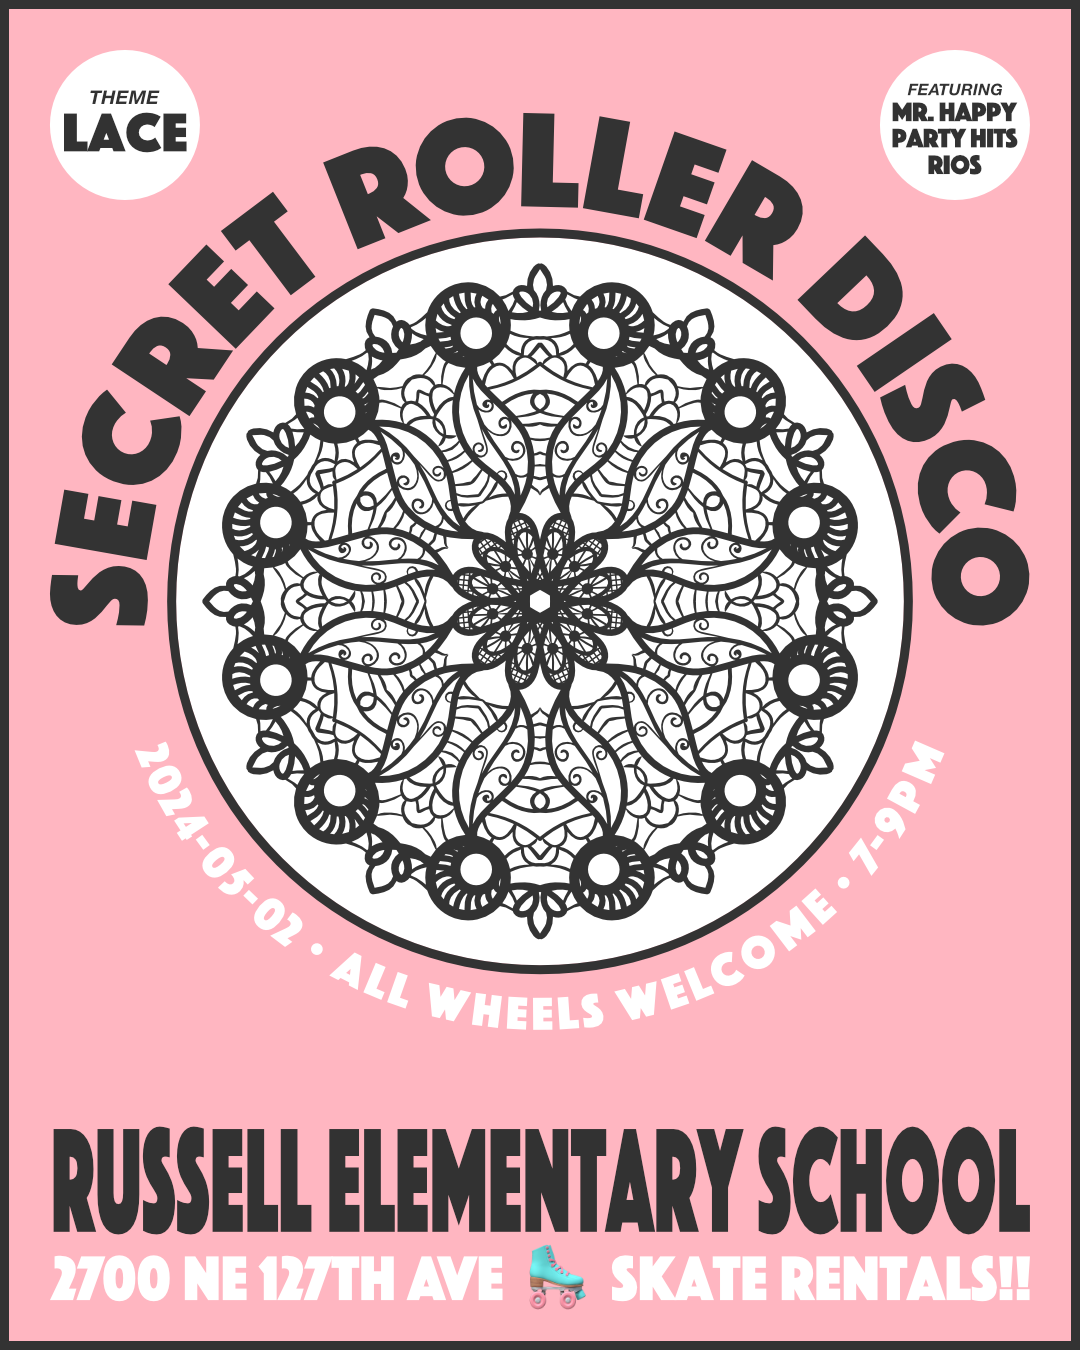 
        Flyer for Secret Roller Disco:
        Thursday, May 2, 2024, 7 to 9pm.
        Russell Elementary School.  2700 NE 127th Ave. All wheels welcome.
        Skate Rentals!
      